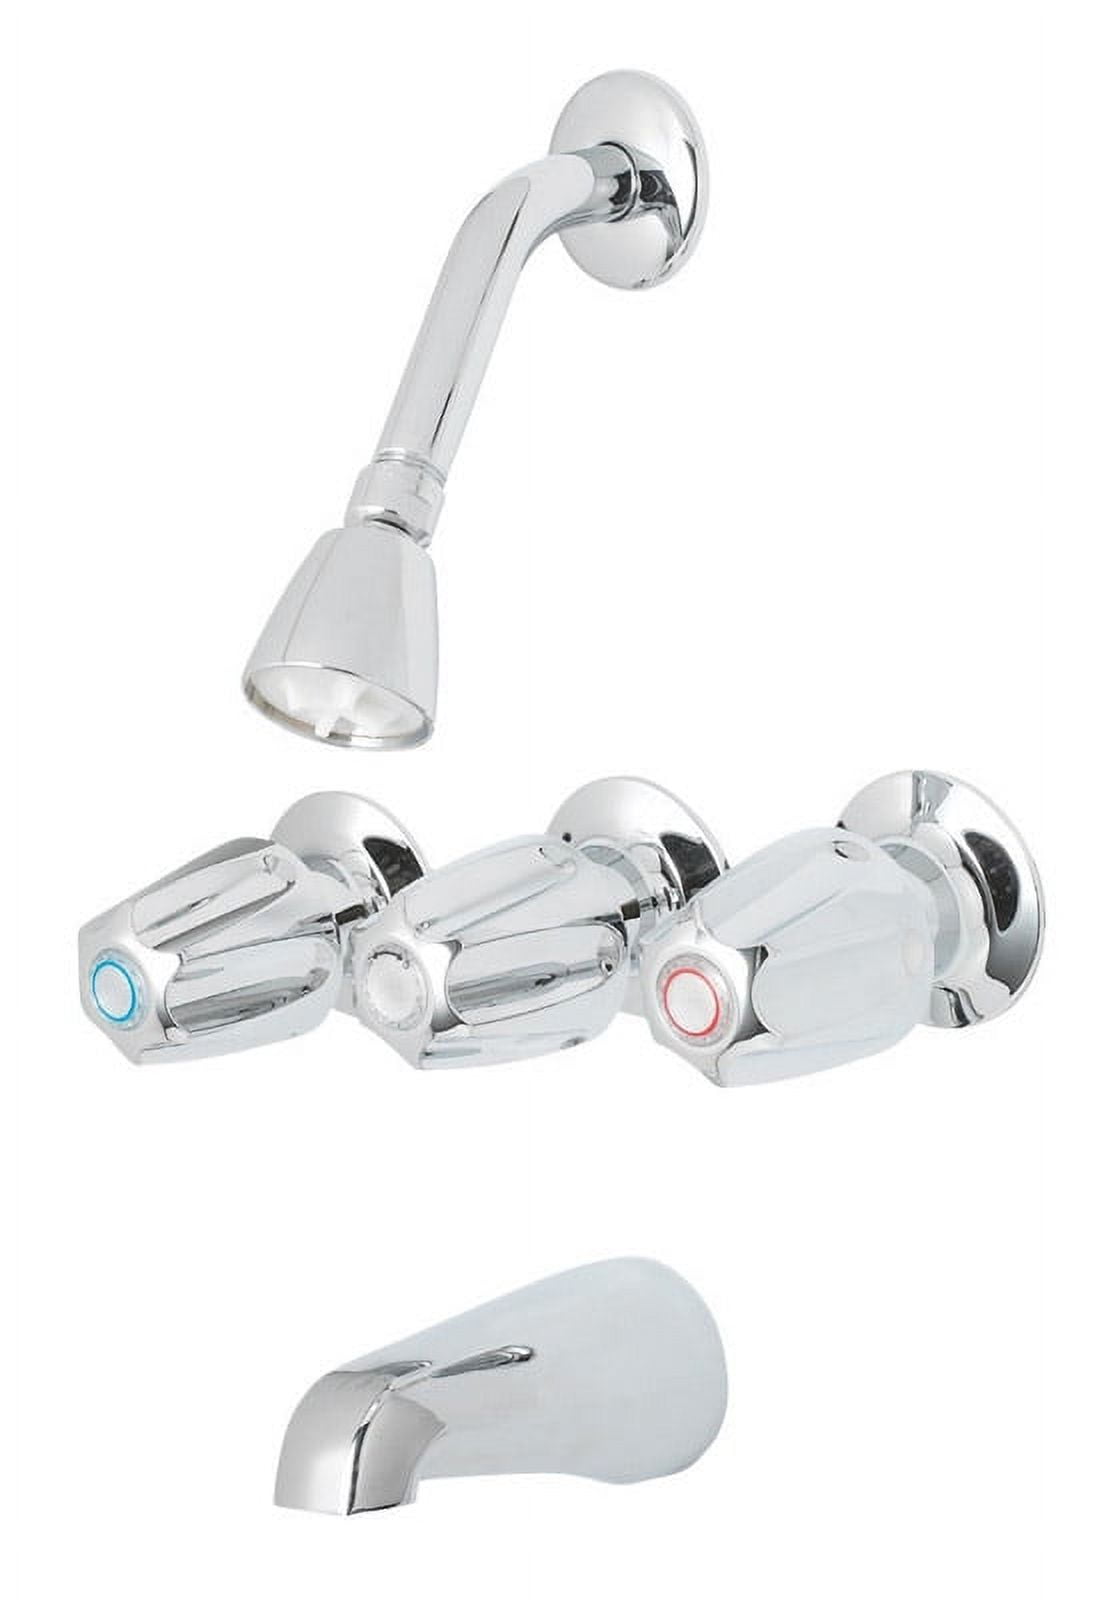 Picture of Ace 4100848 Oakbrook Tub & Shower Faucet Three Handle 2.0 Gpm Polished Chrome